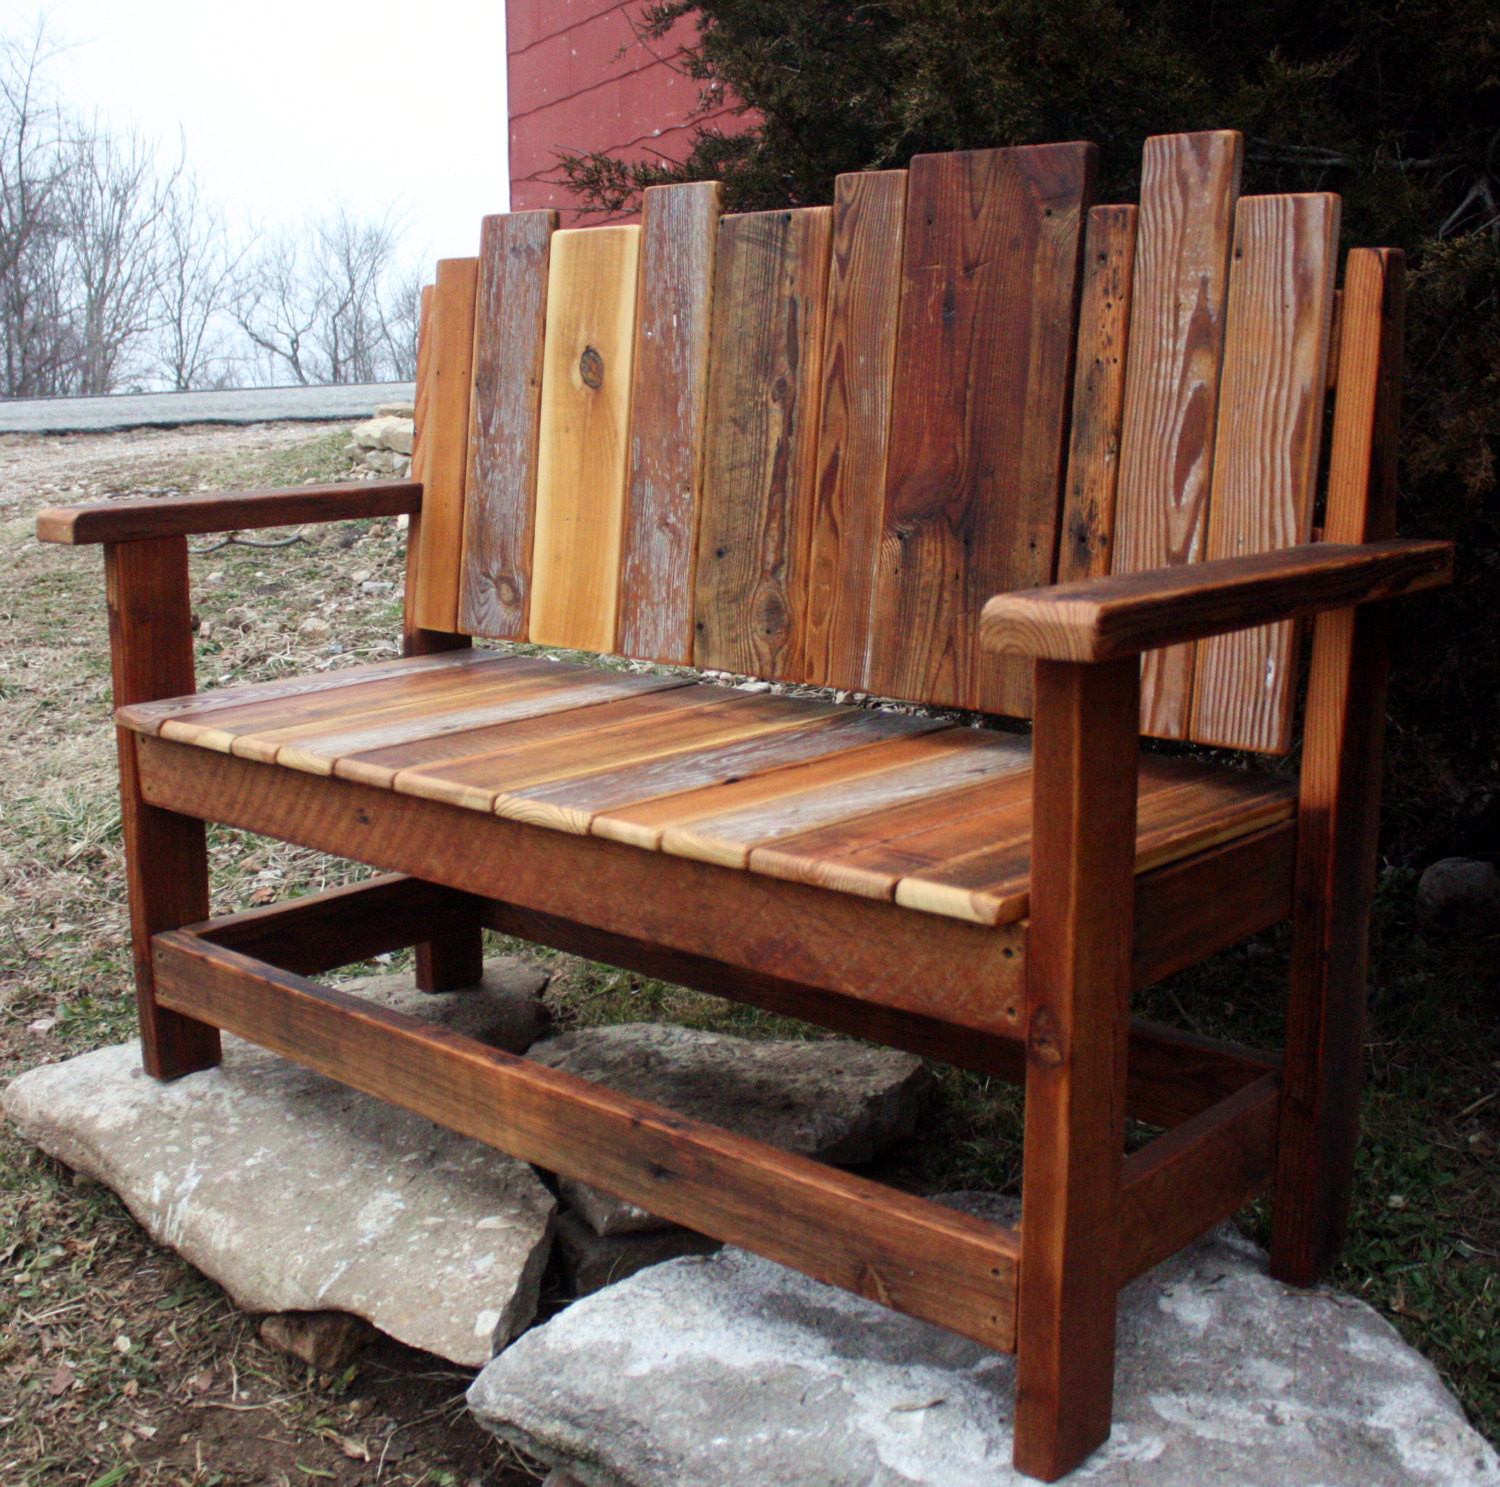 DIY Outdoor Wooden Bench
 21 Amazing Outdoor Bench Ideas Style Motivation